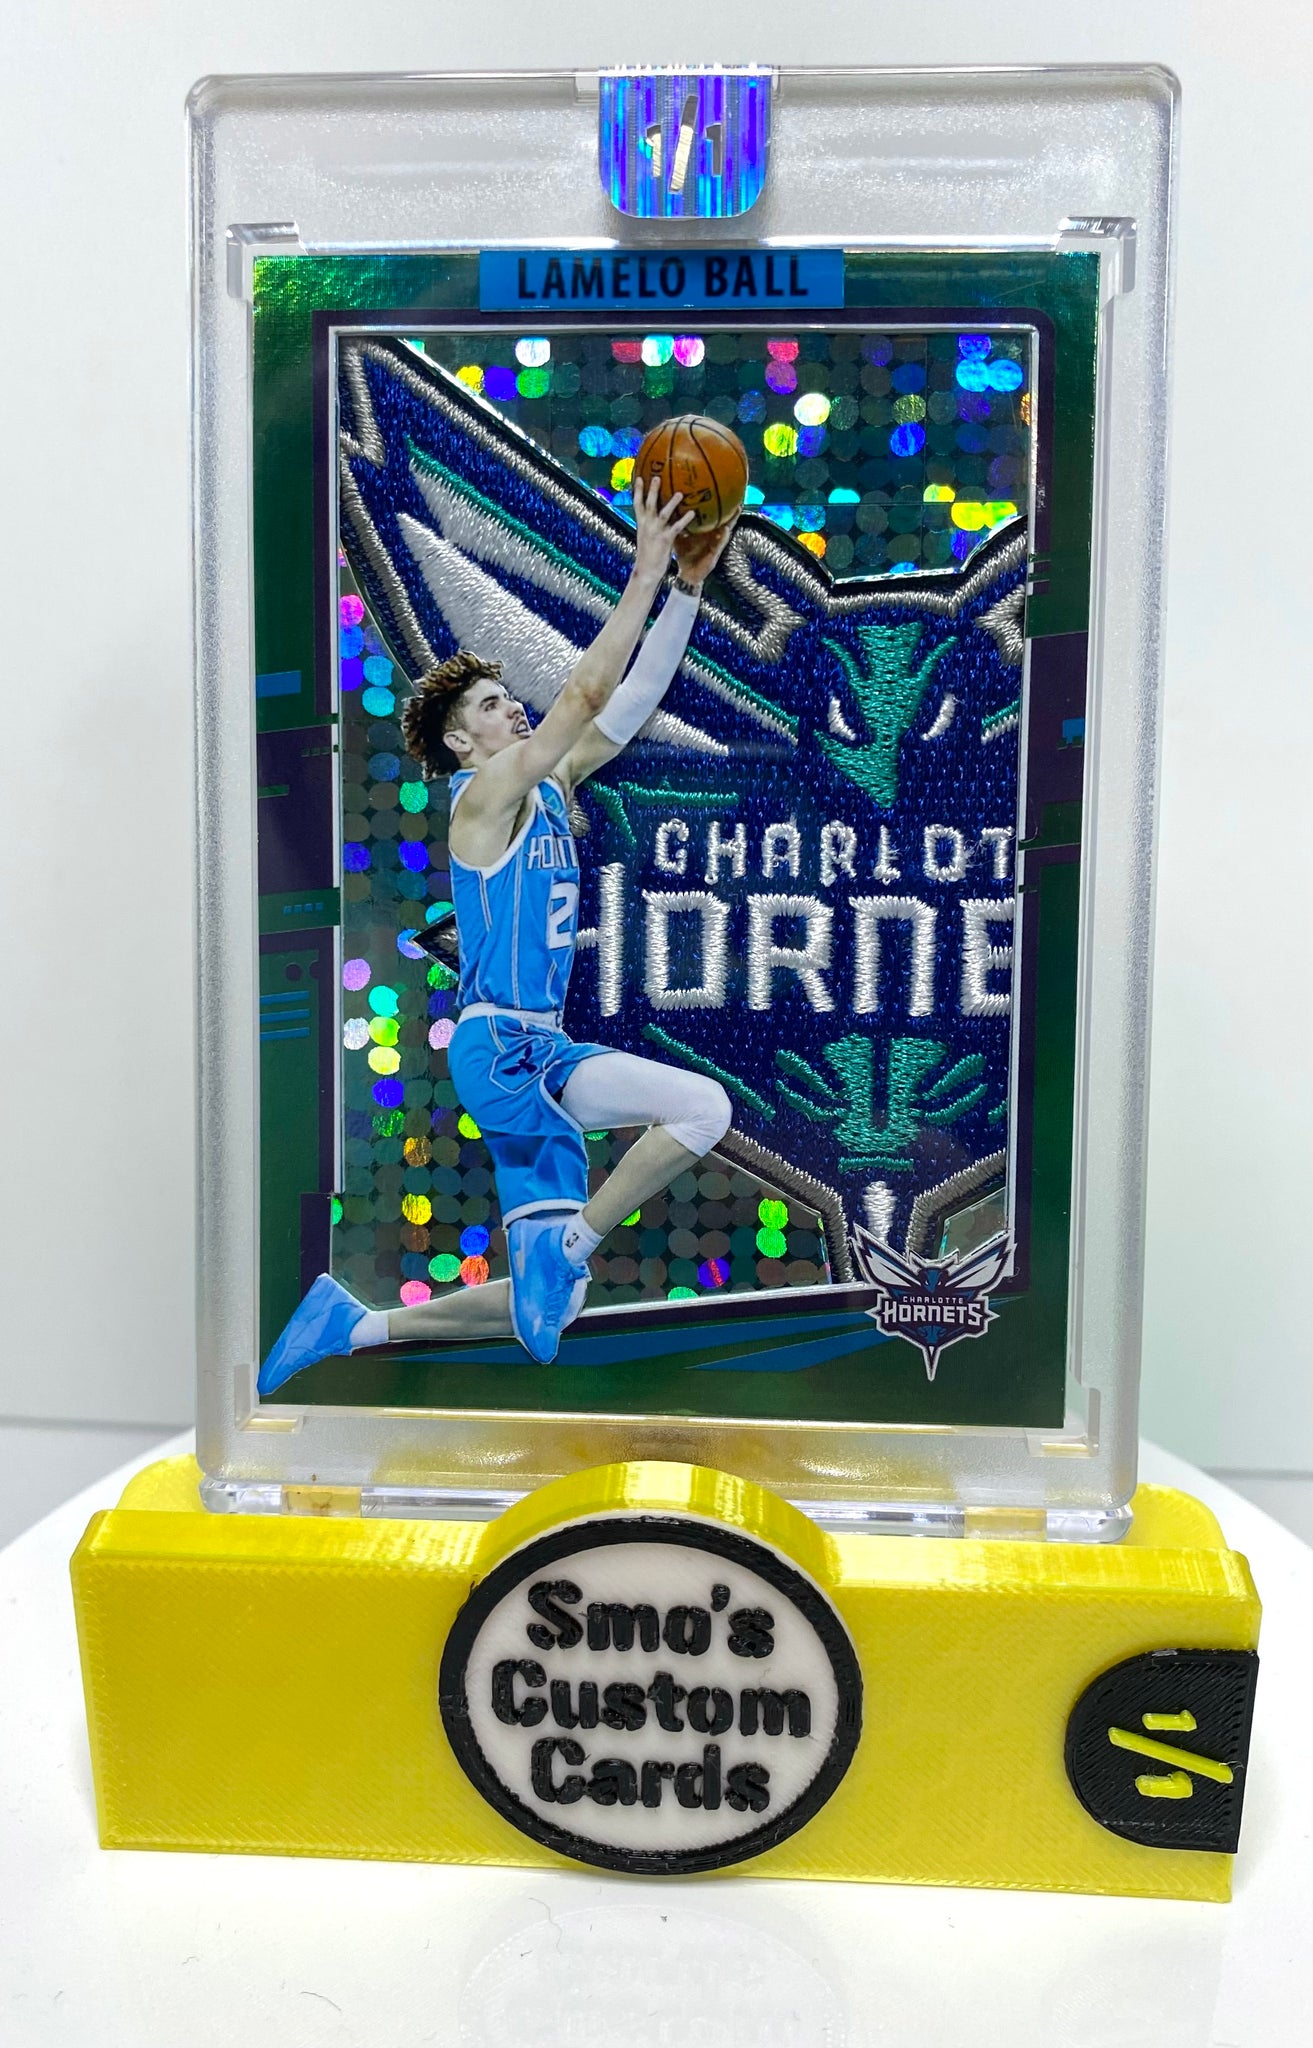 LaMelo Ball Teal Pulsar Charlotte Hornets Patch 1/1